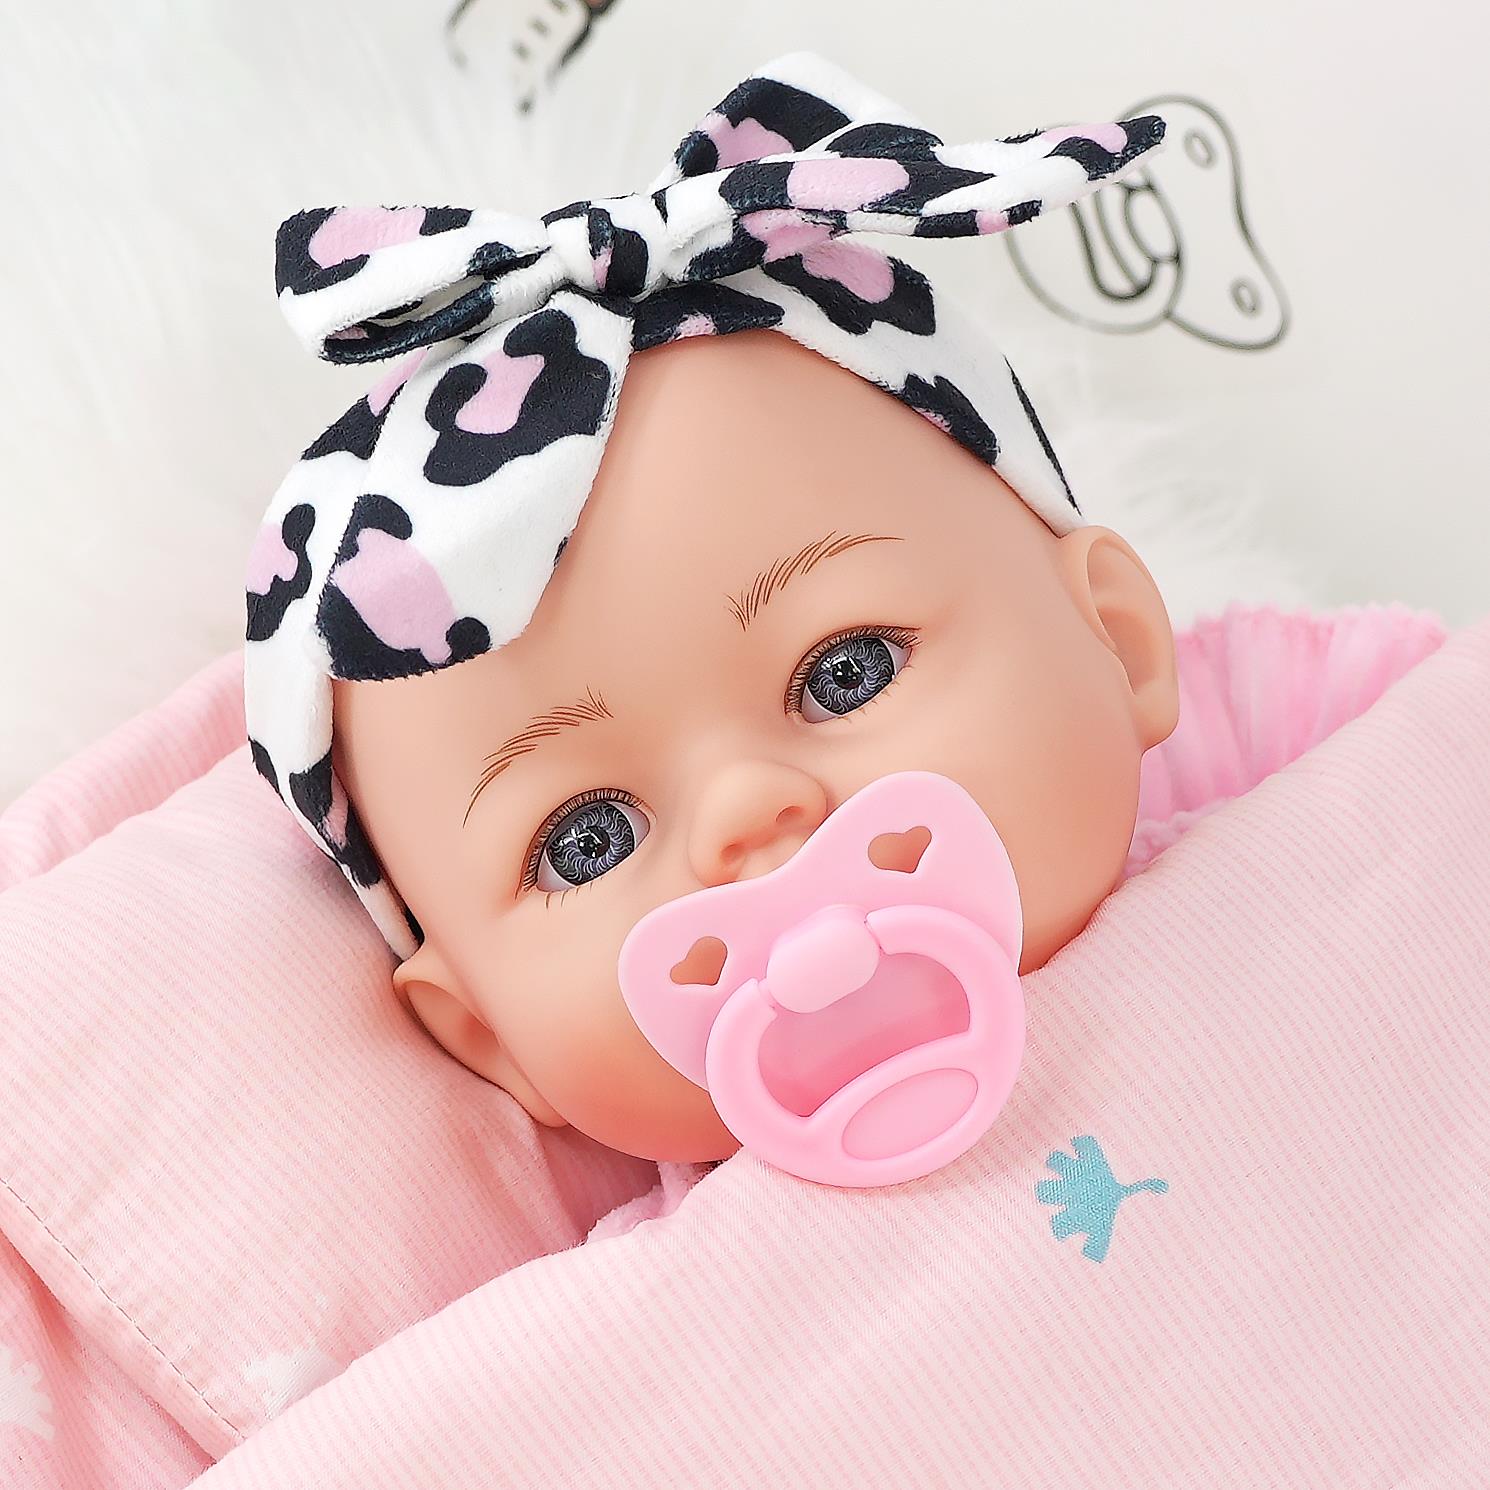 BiBi Baby Girl with Bonus Outfit (45 cm / 18") by BiBi Doll - The Magic Toy Shop